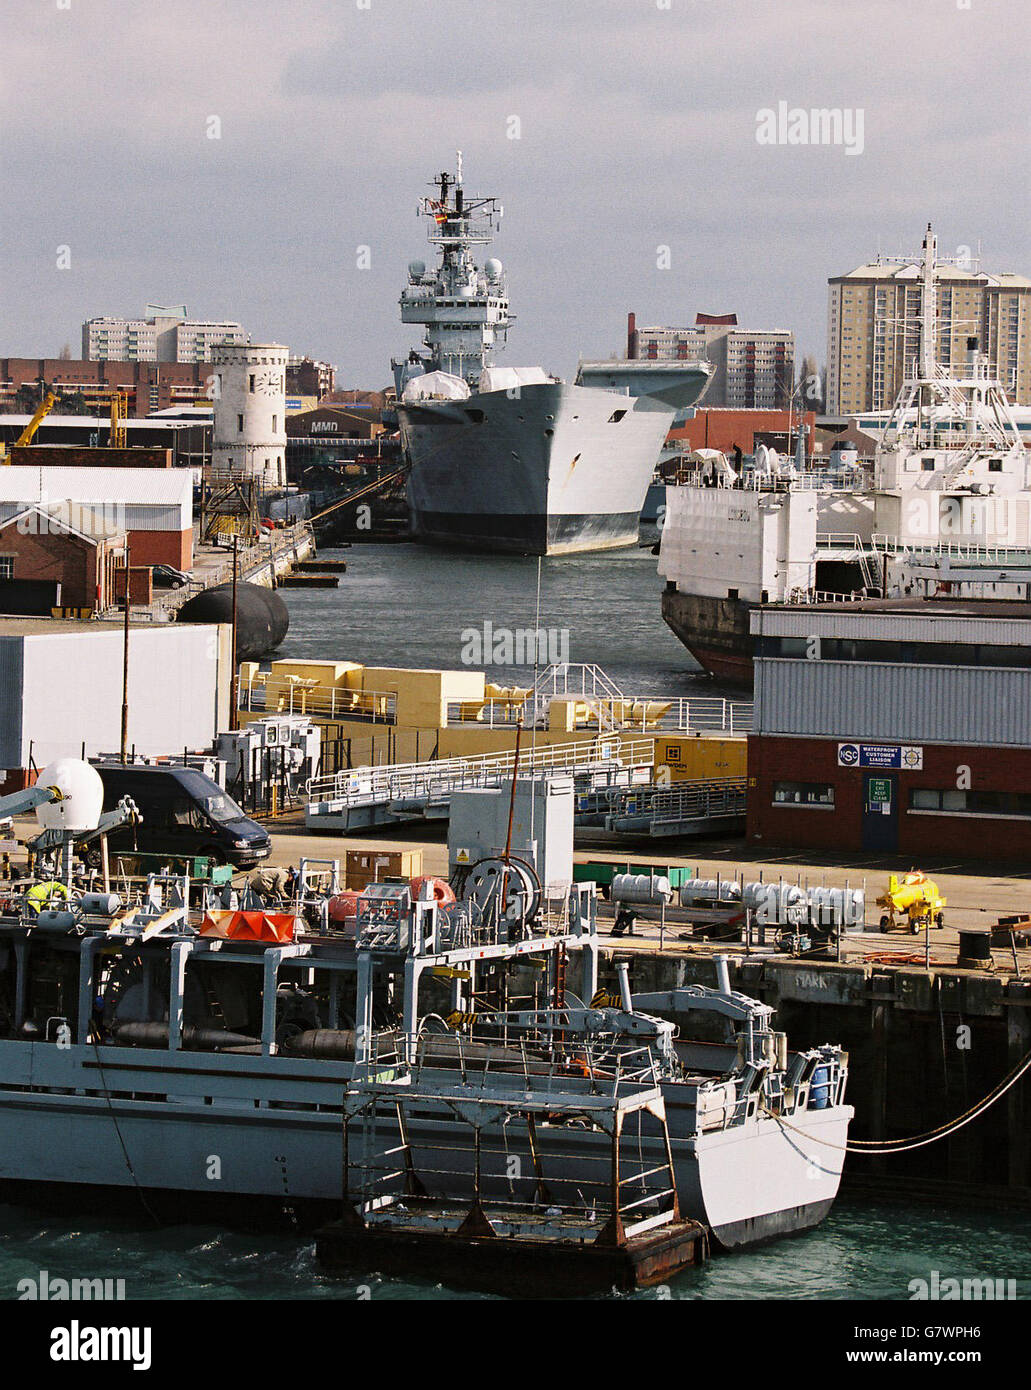 Portsmouth Harbour. Part of the Royal Navy's Dockyard. Stock Photo